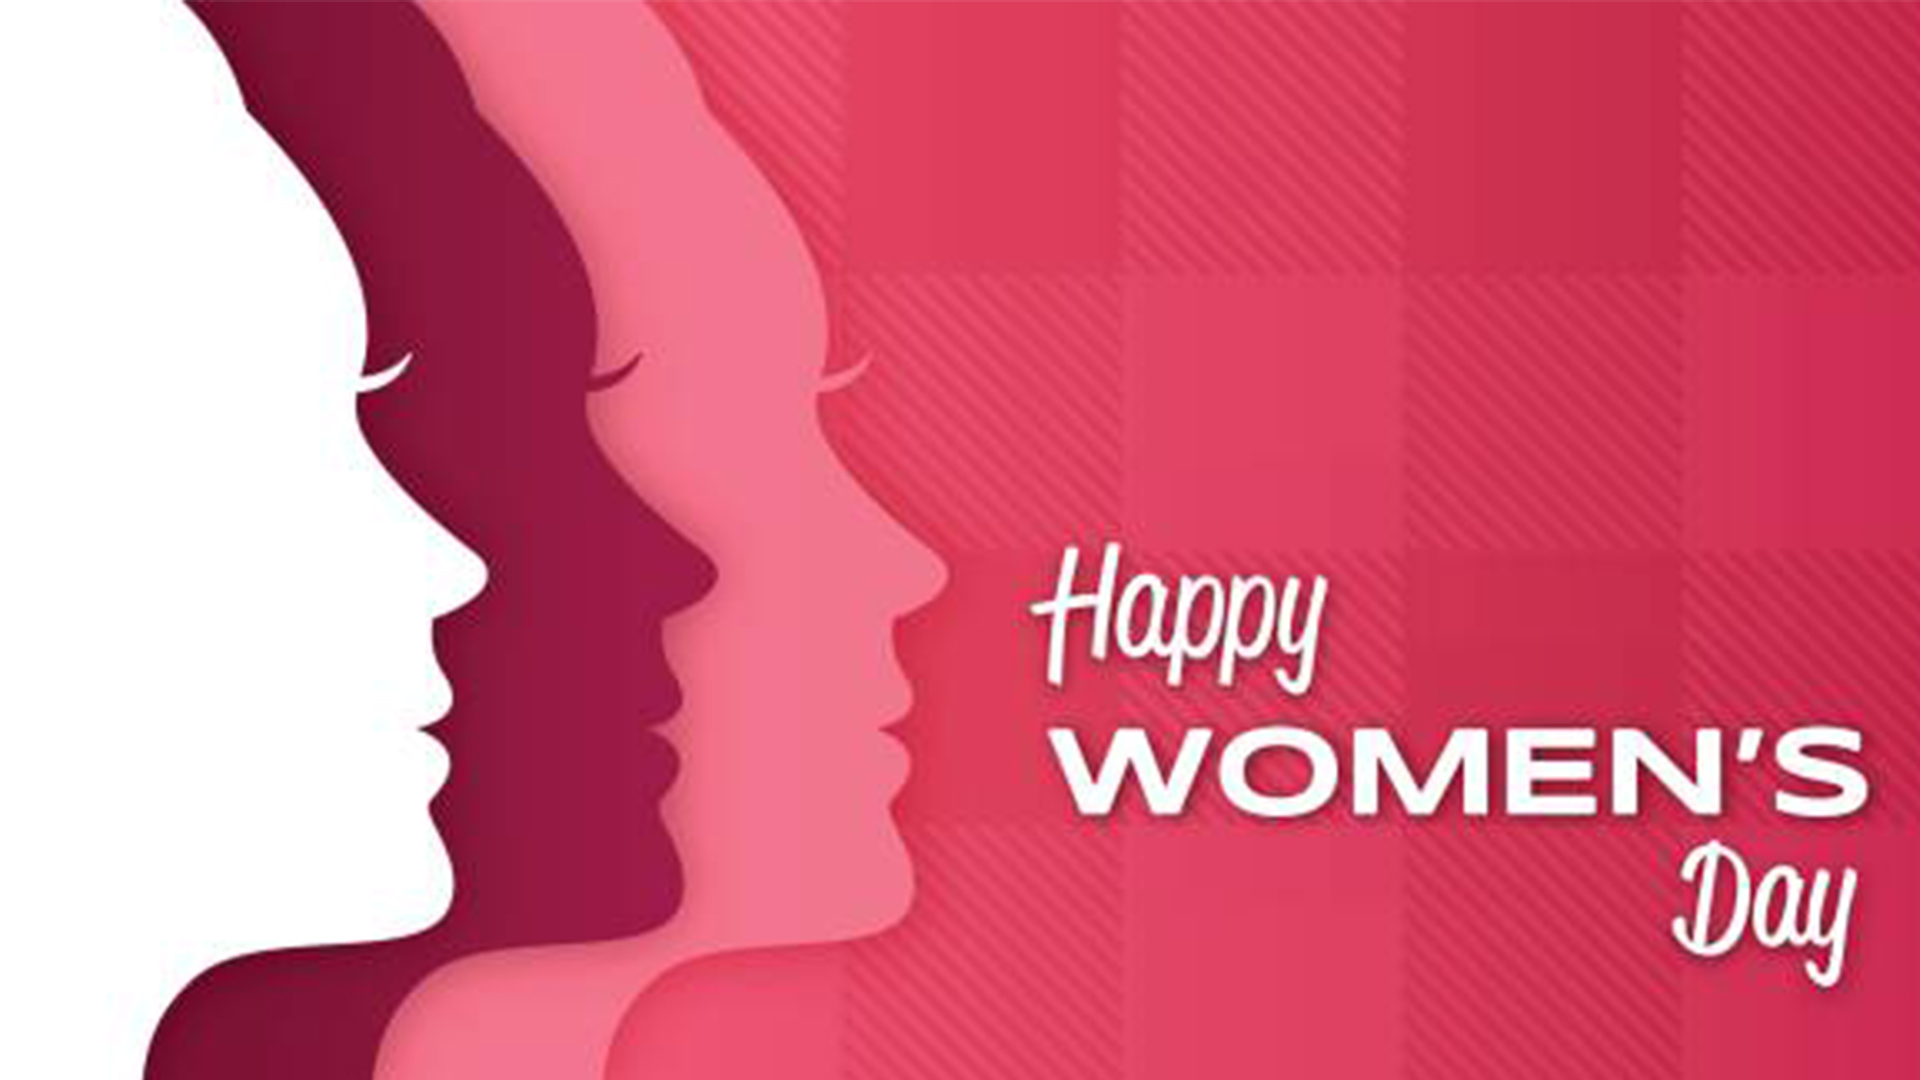 happy womens day image 2019